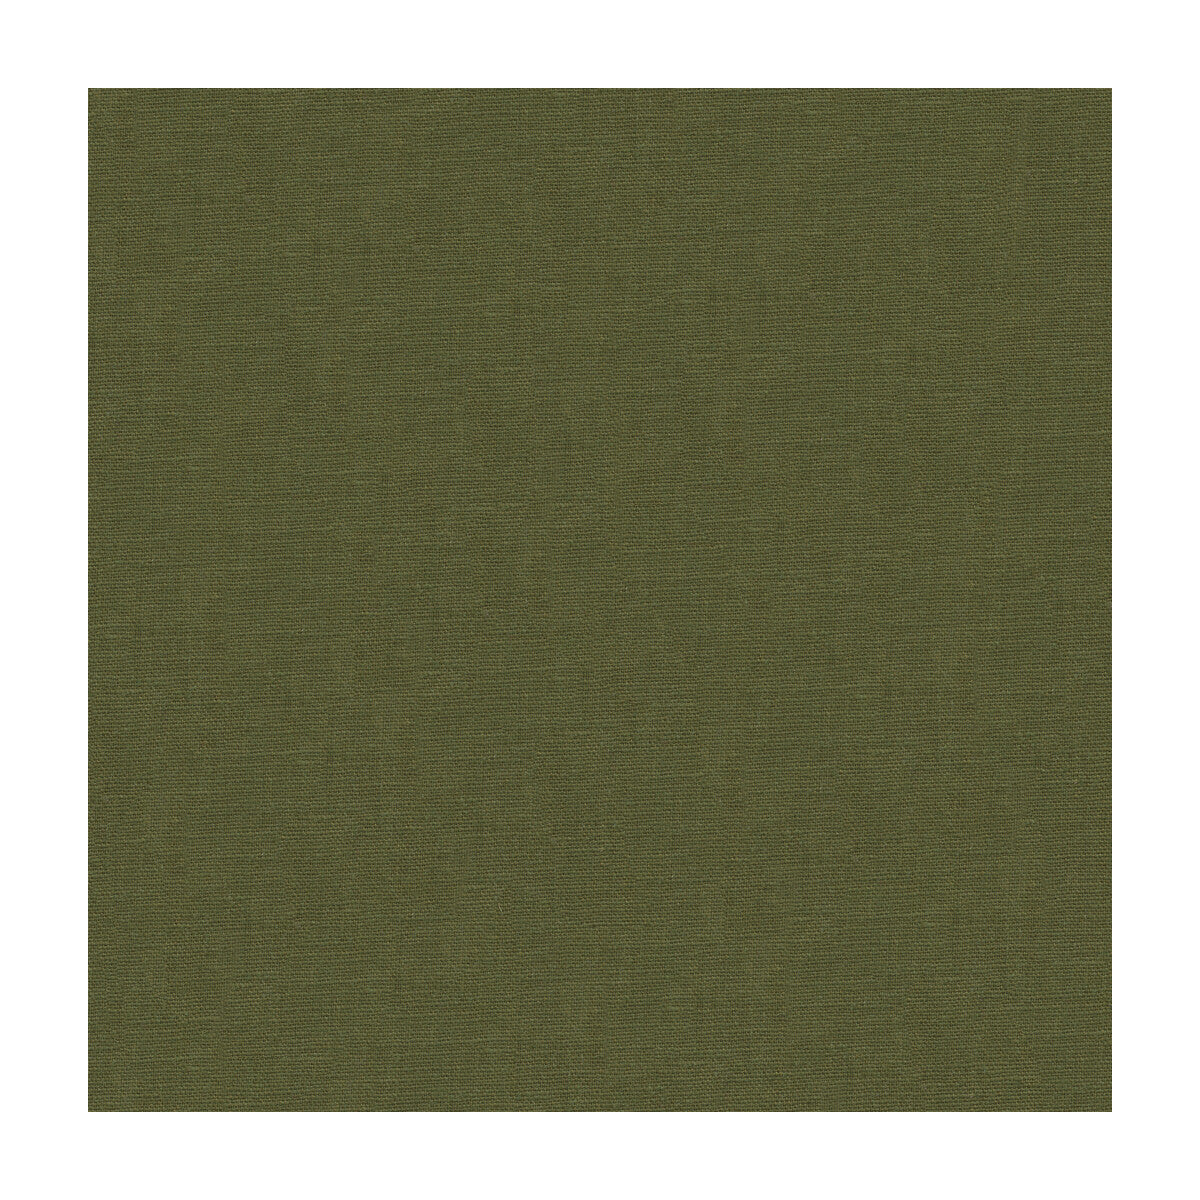 Dublin fabric in bamboo color - pattern 32344.303.0 - by Kravet Basics in the Perfect Plains collection